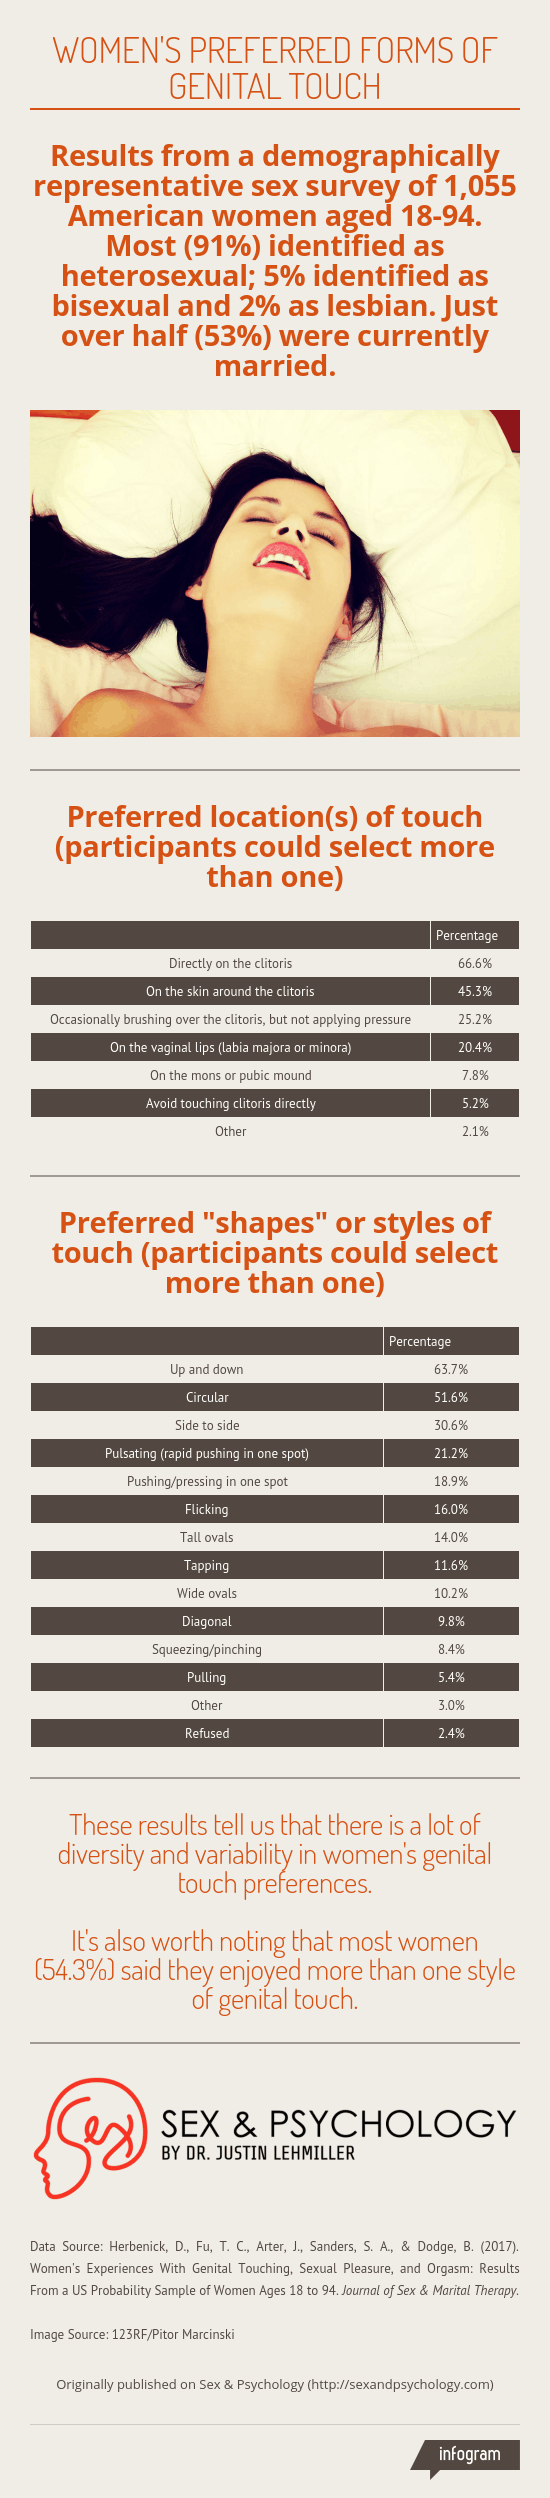 infographic-womens-preferred-genital-touch.png